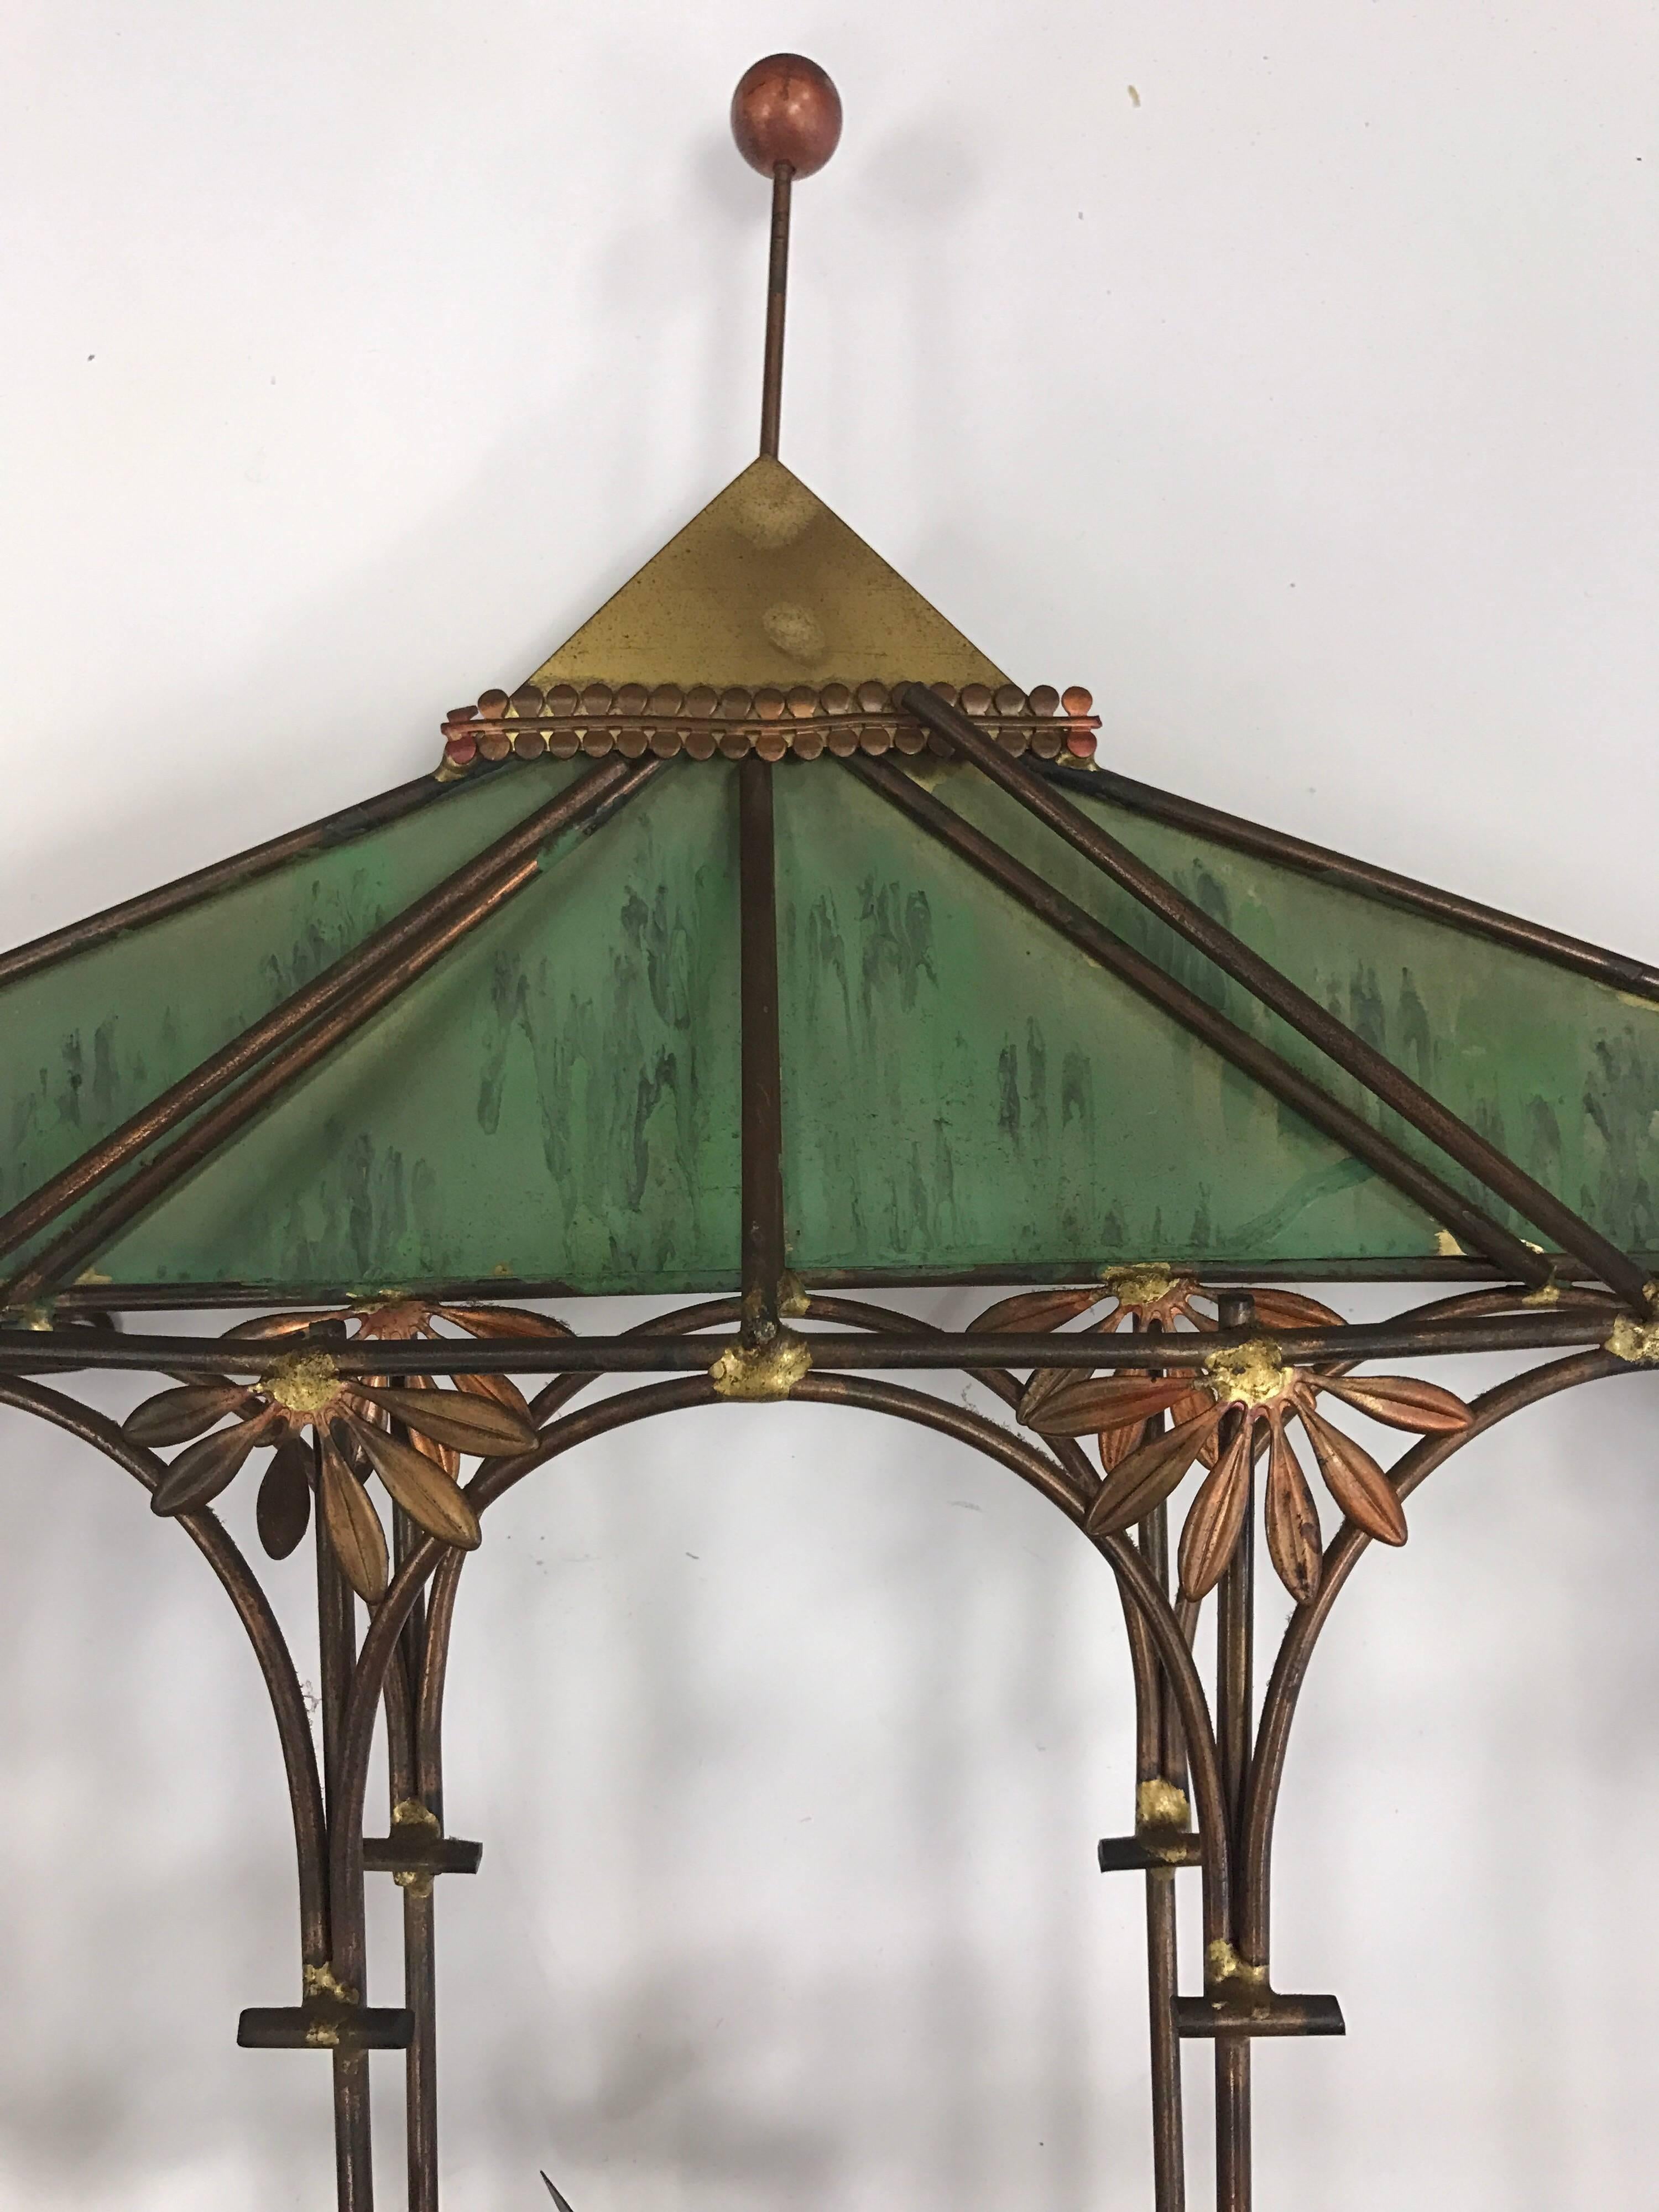 Metal Signed Curtis Jere the Bandstand Pagoda Gazebo Wall Sculpture